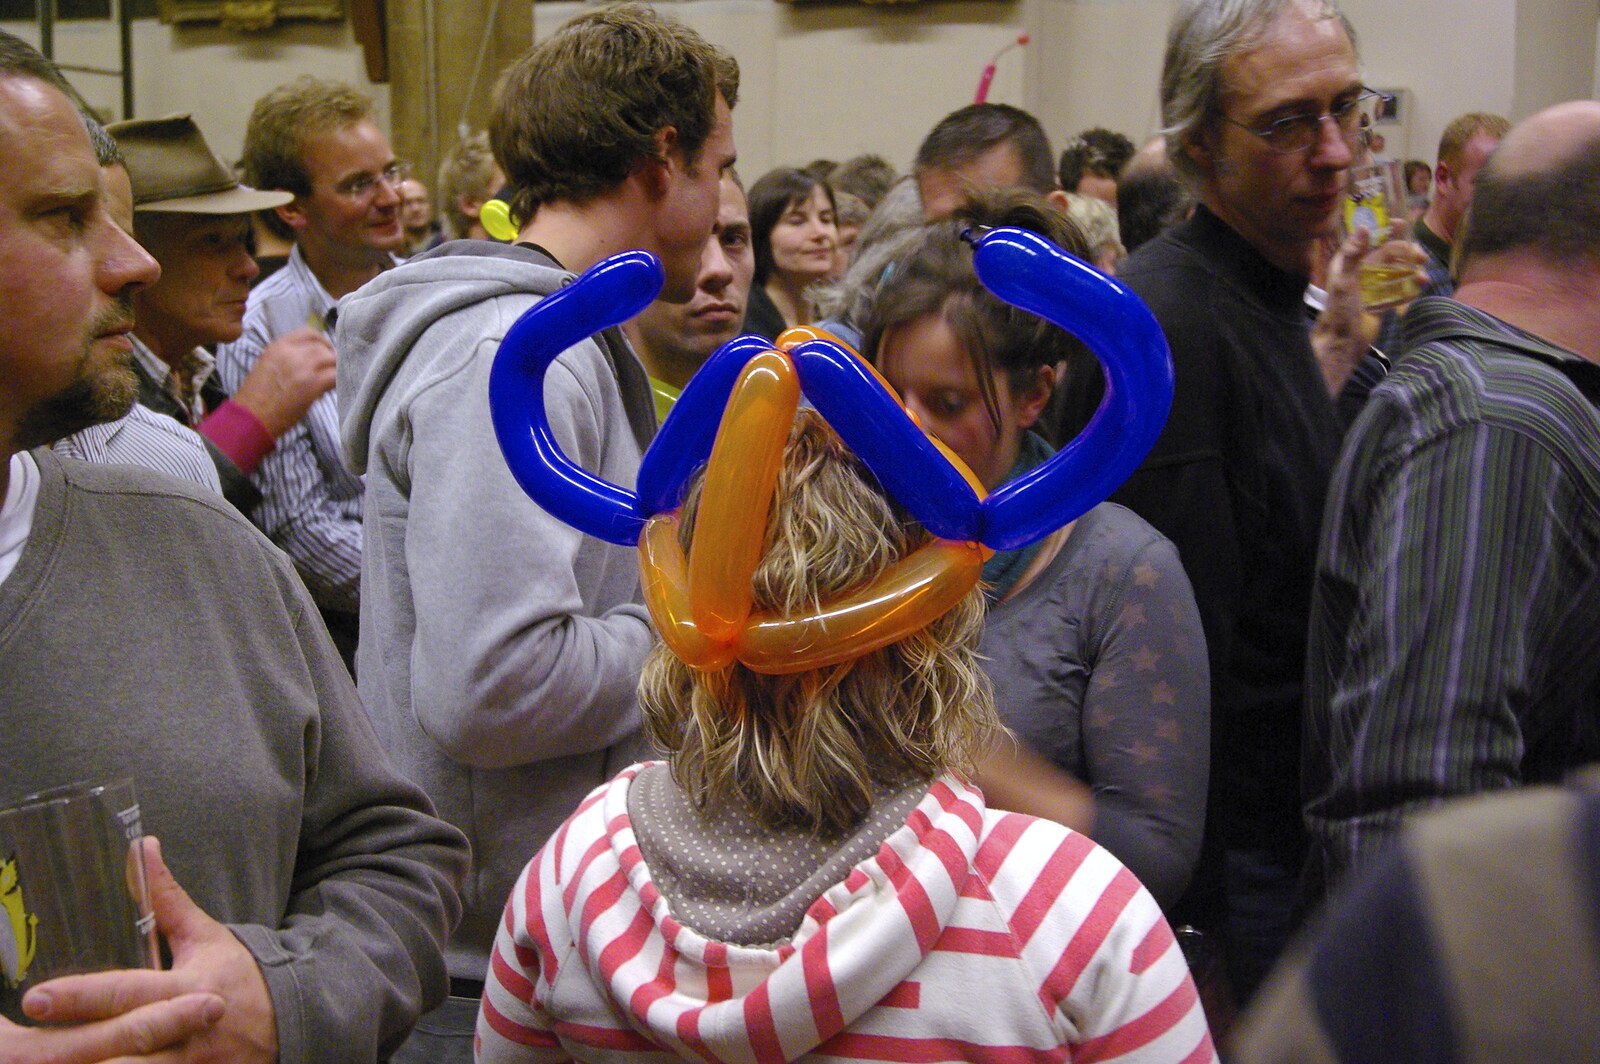 The 30th Norwich Beer Festival, St. Andrew's Hall, Norfolk - 24th October 2007: Balloon things on the head